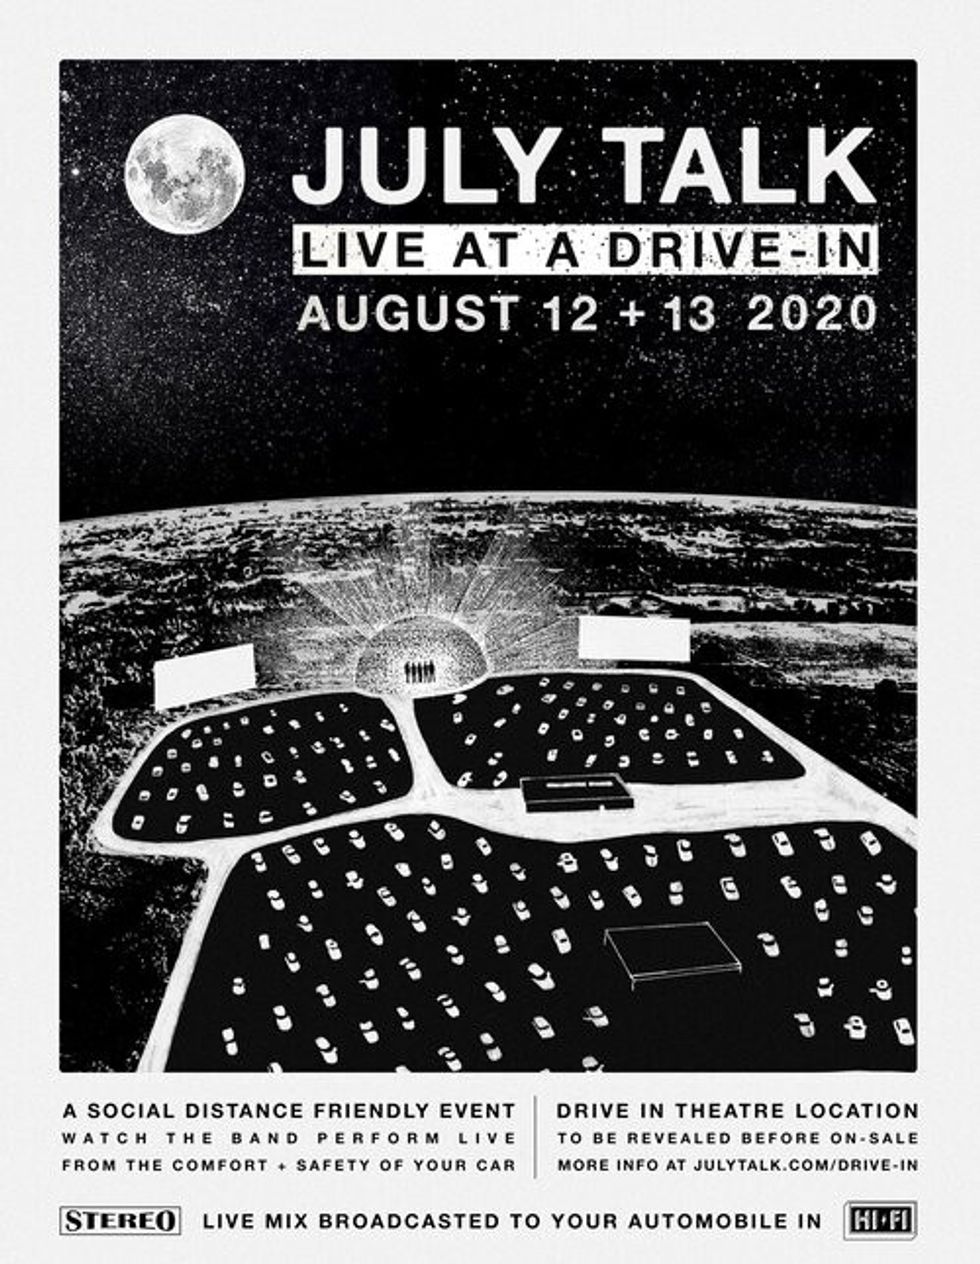 July Talk Announces August Drive-in Shows